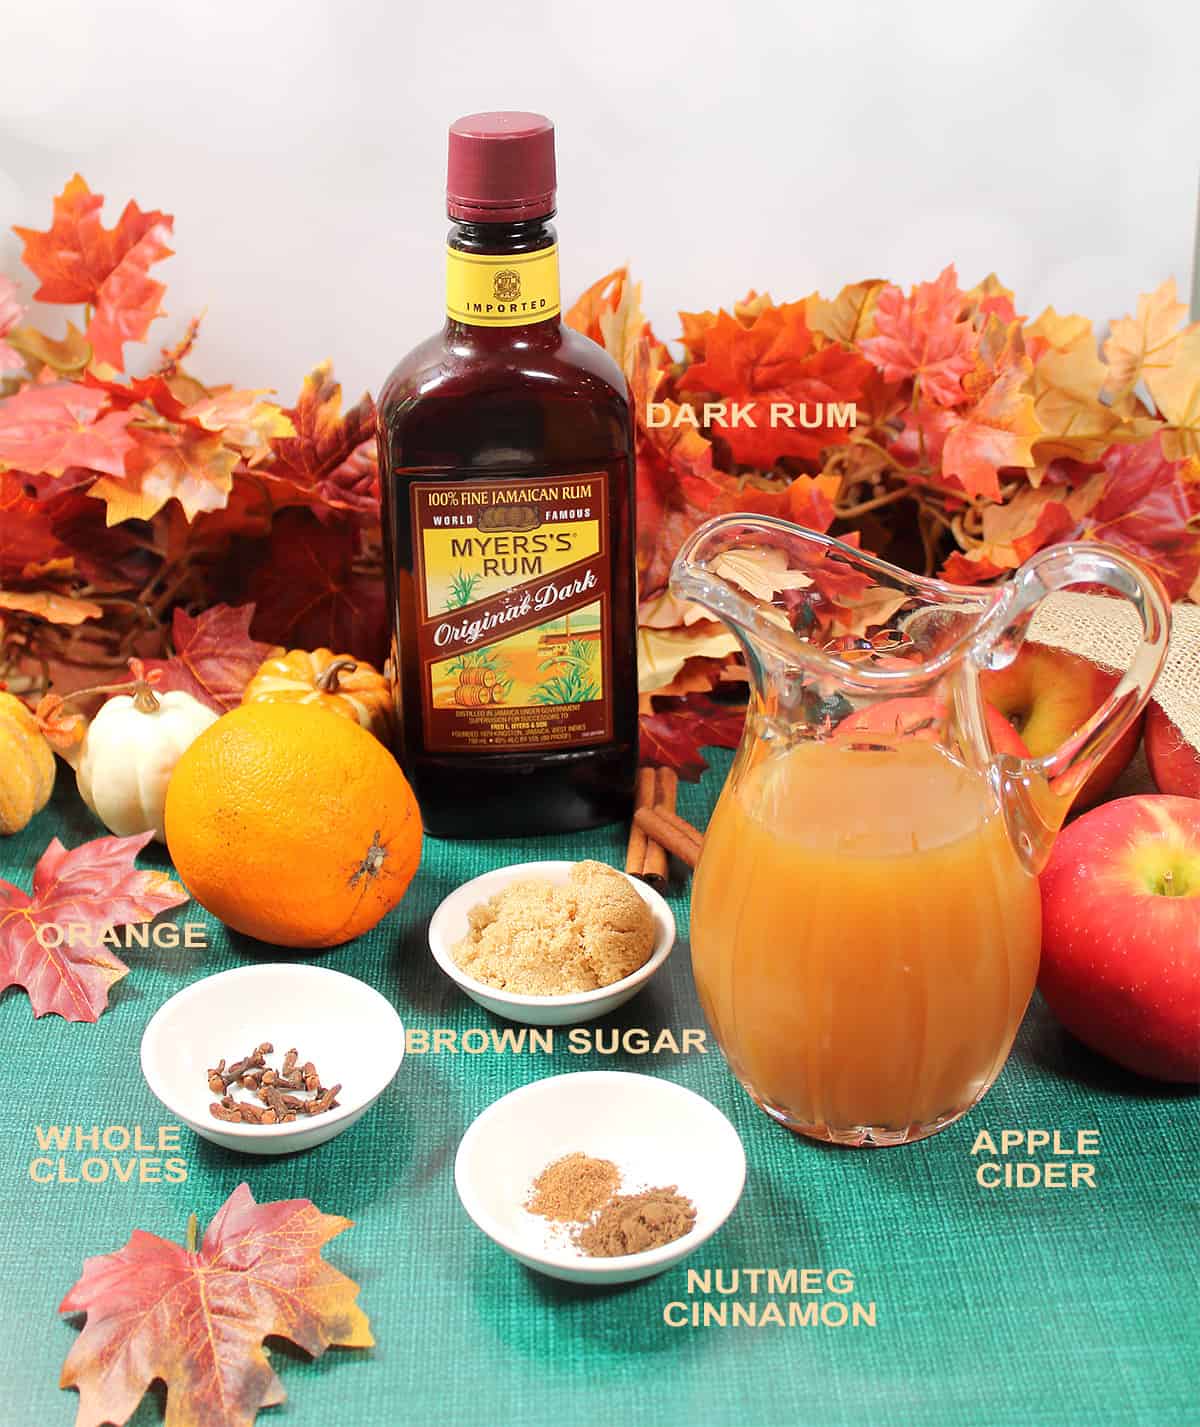 Ingredients for boozy apple cider.